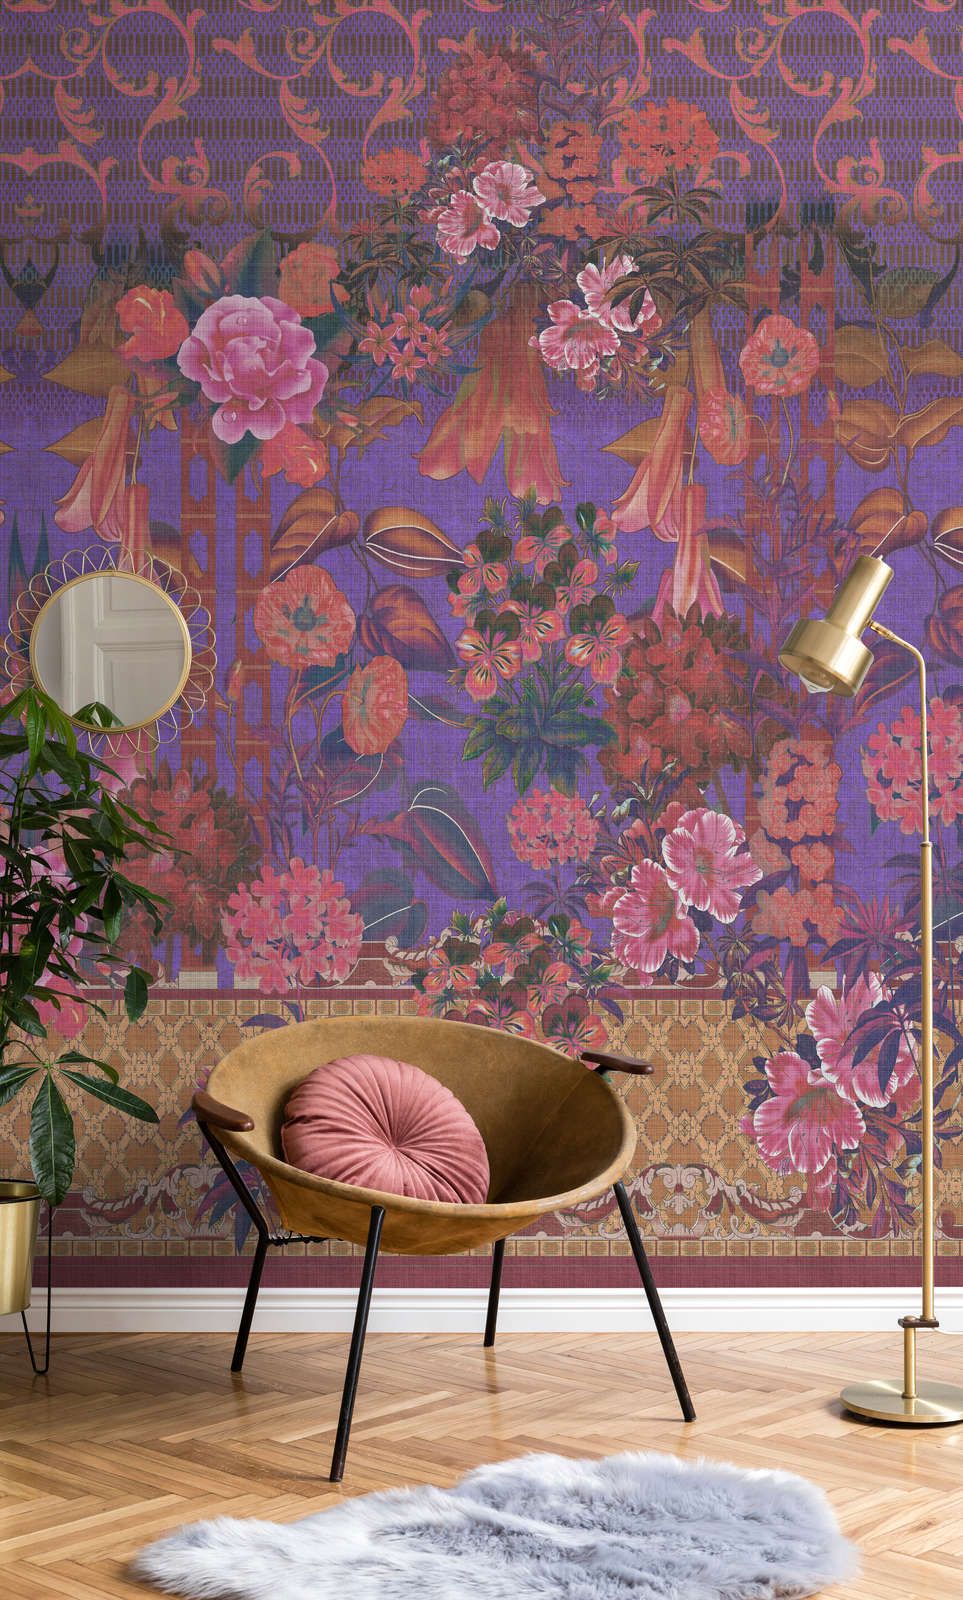             Photo wallpaper »sati 1« - Floral design with linen structure look - Purple | Smooth, slightly shiny premium non-woven fabric
        